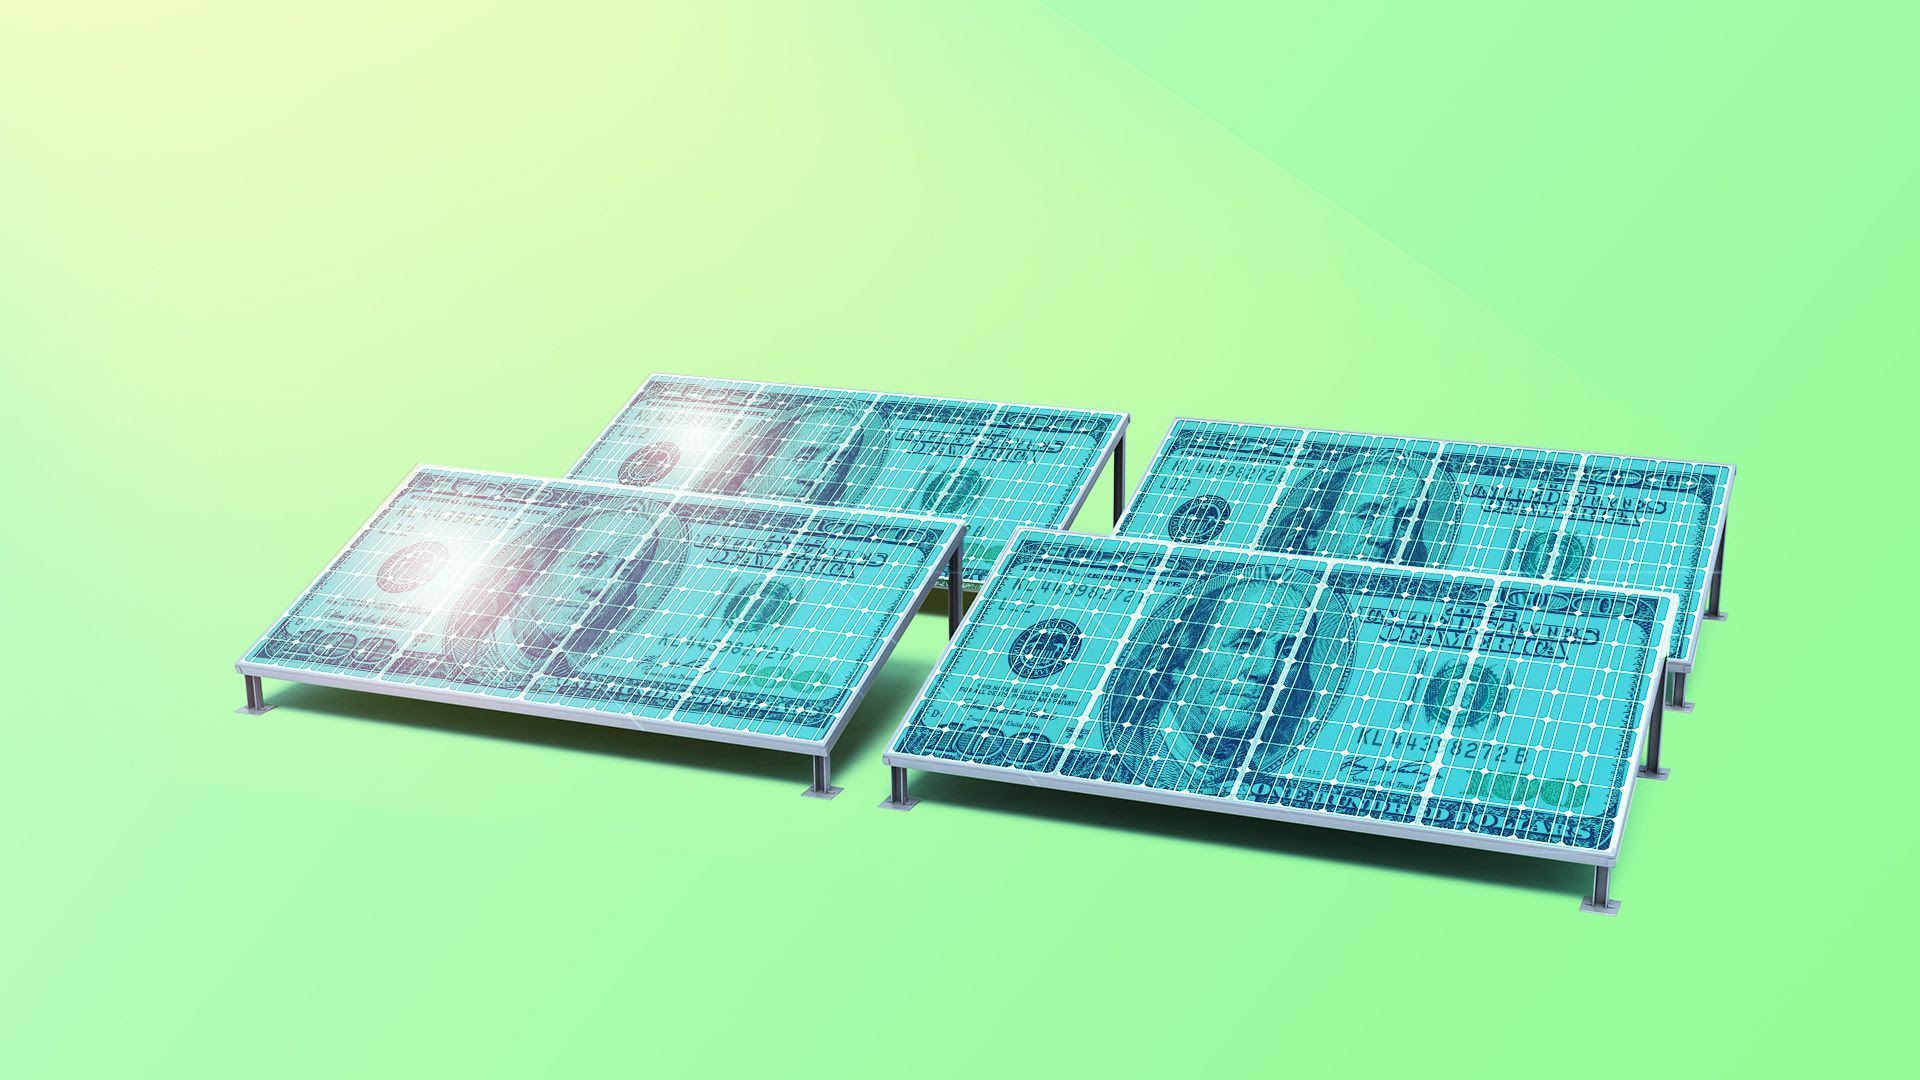 Solar panels with money signs on them